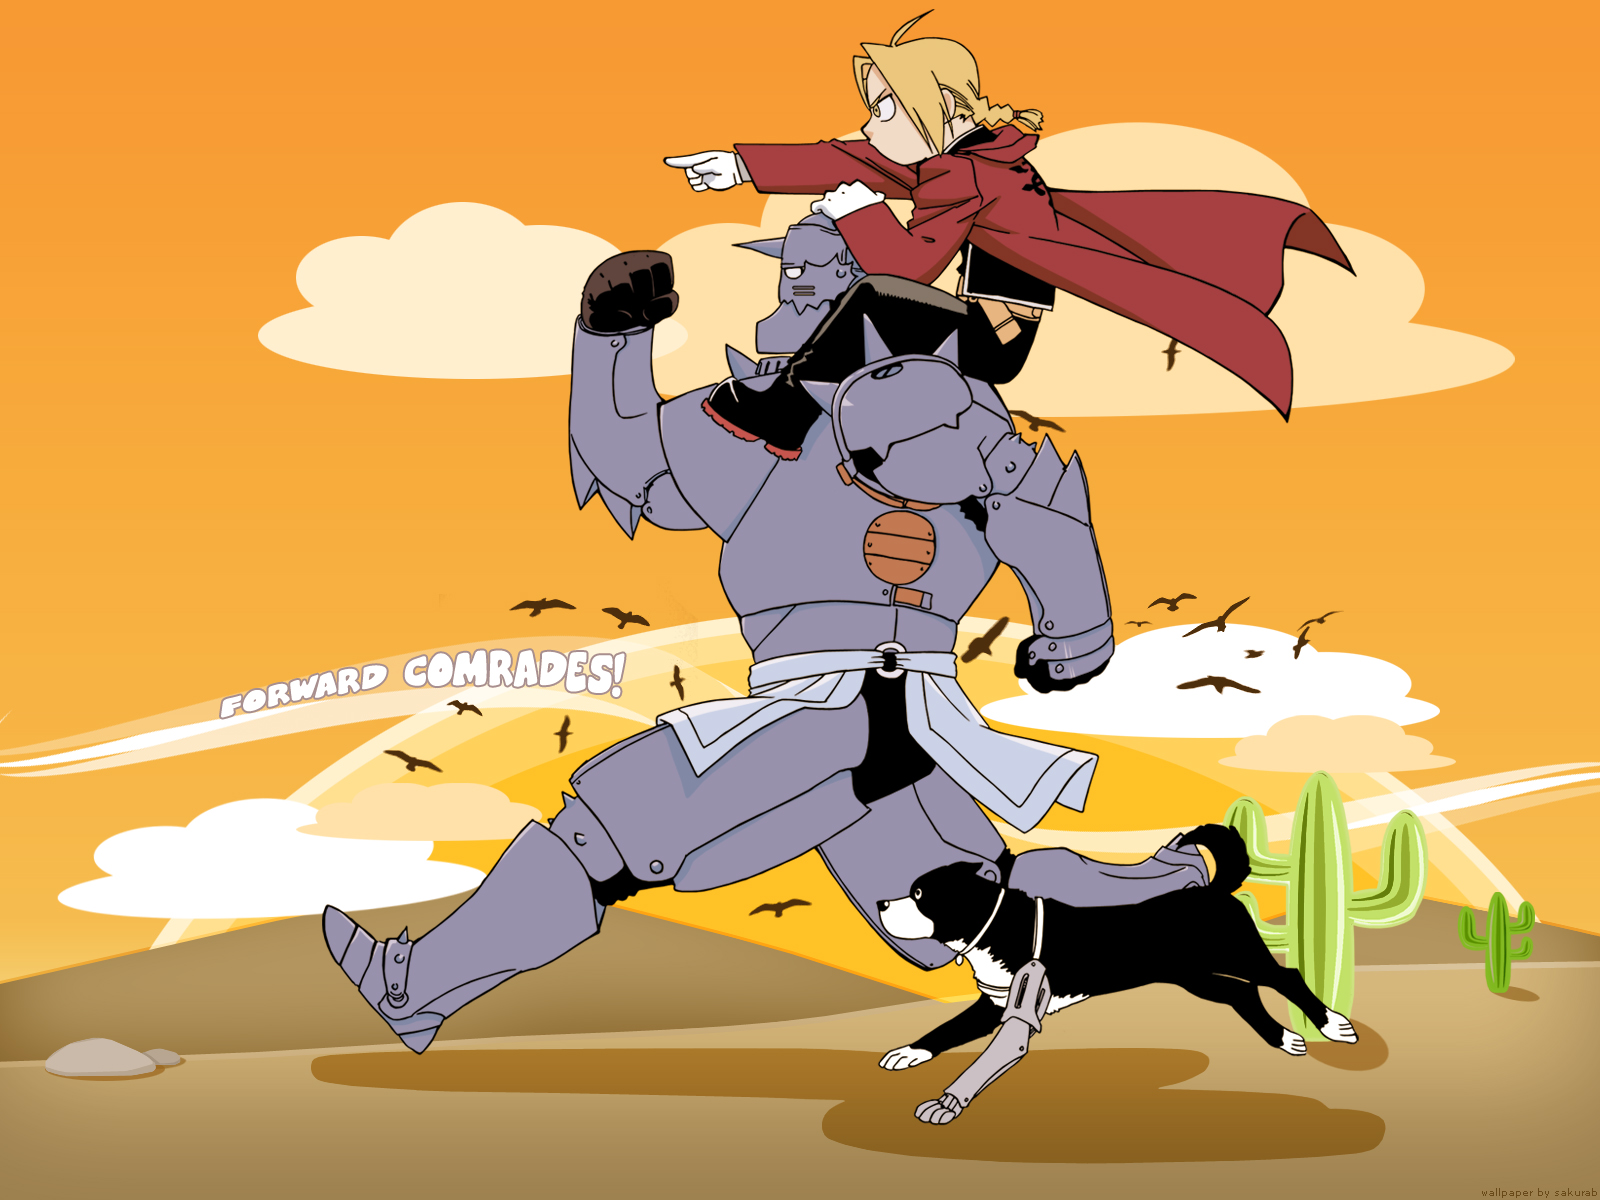 Edward and Alphonse Elric from FullMetal Alchemist standing together against a background of anime artwork.